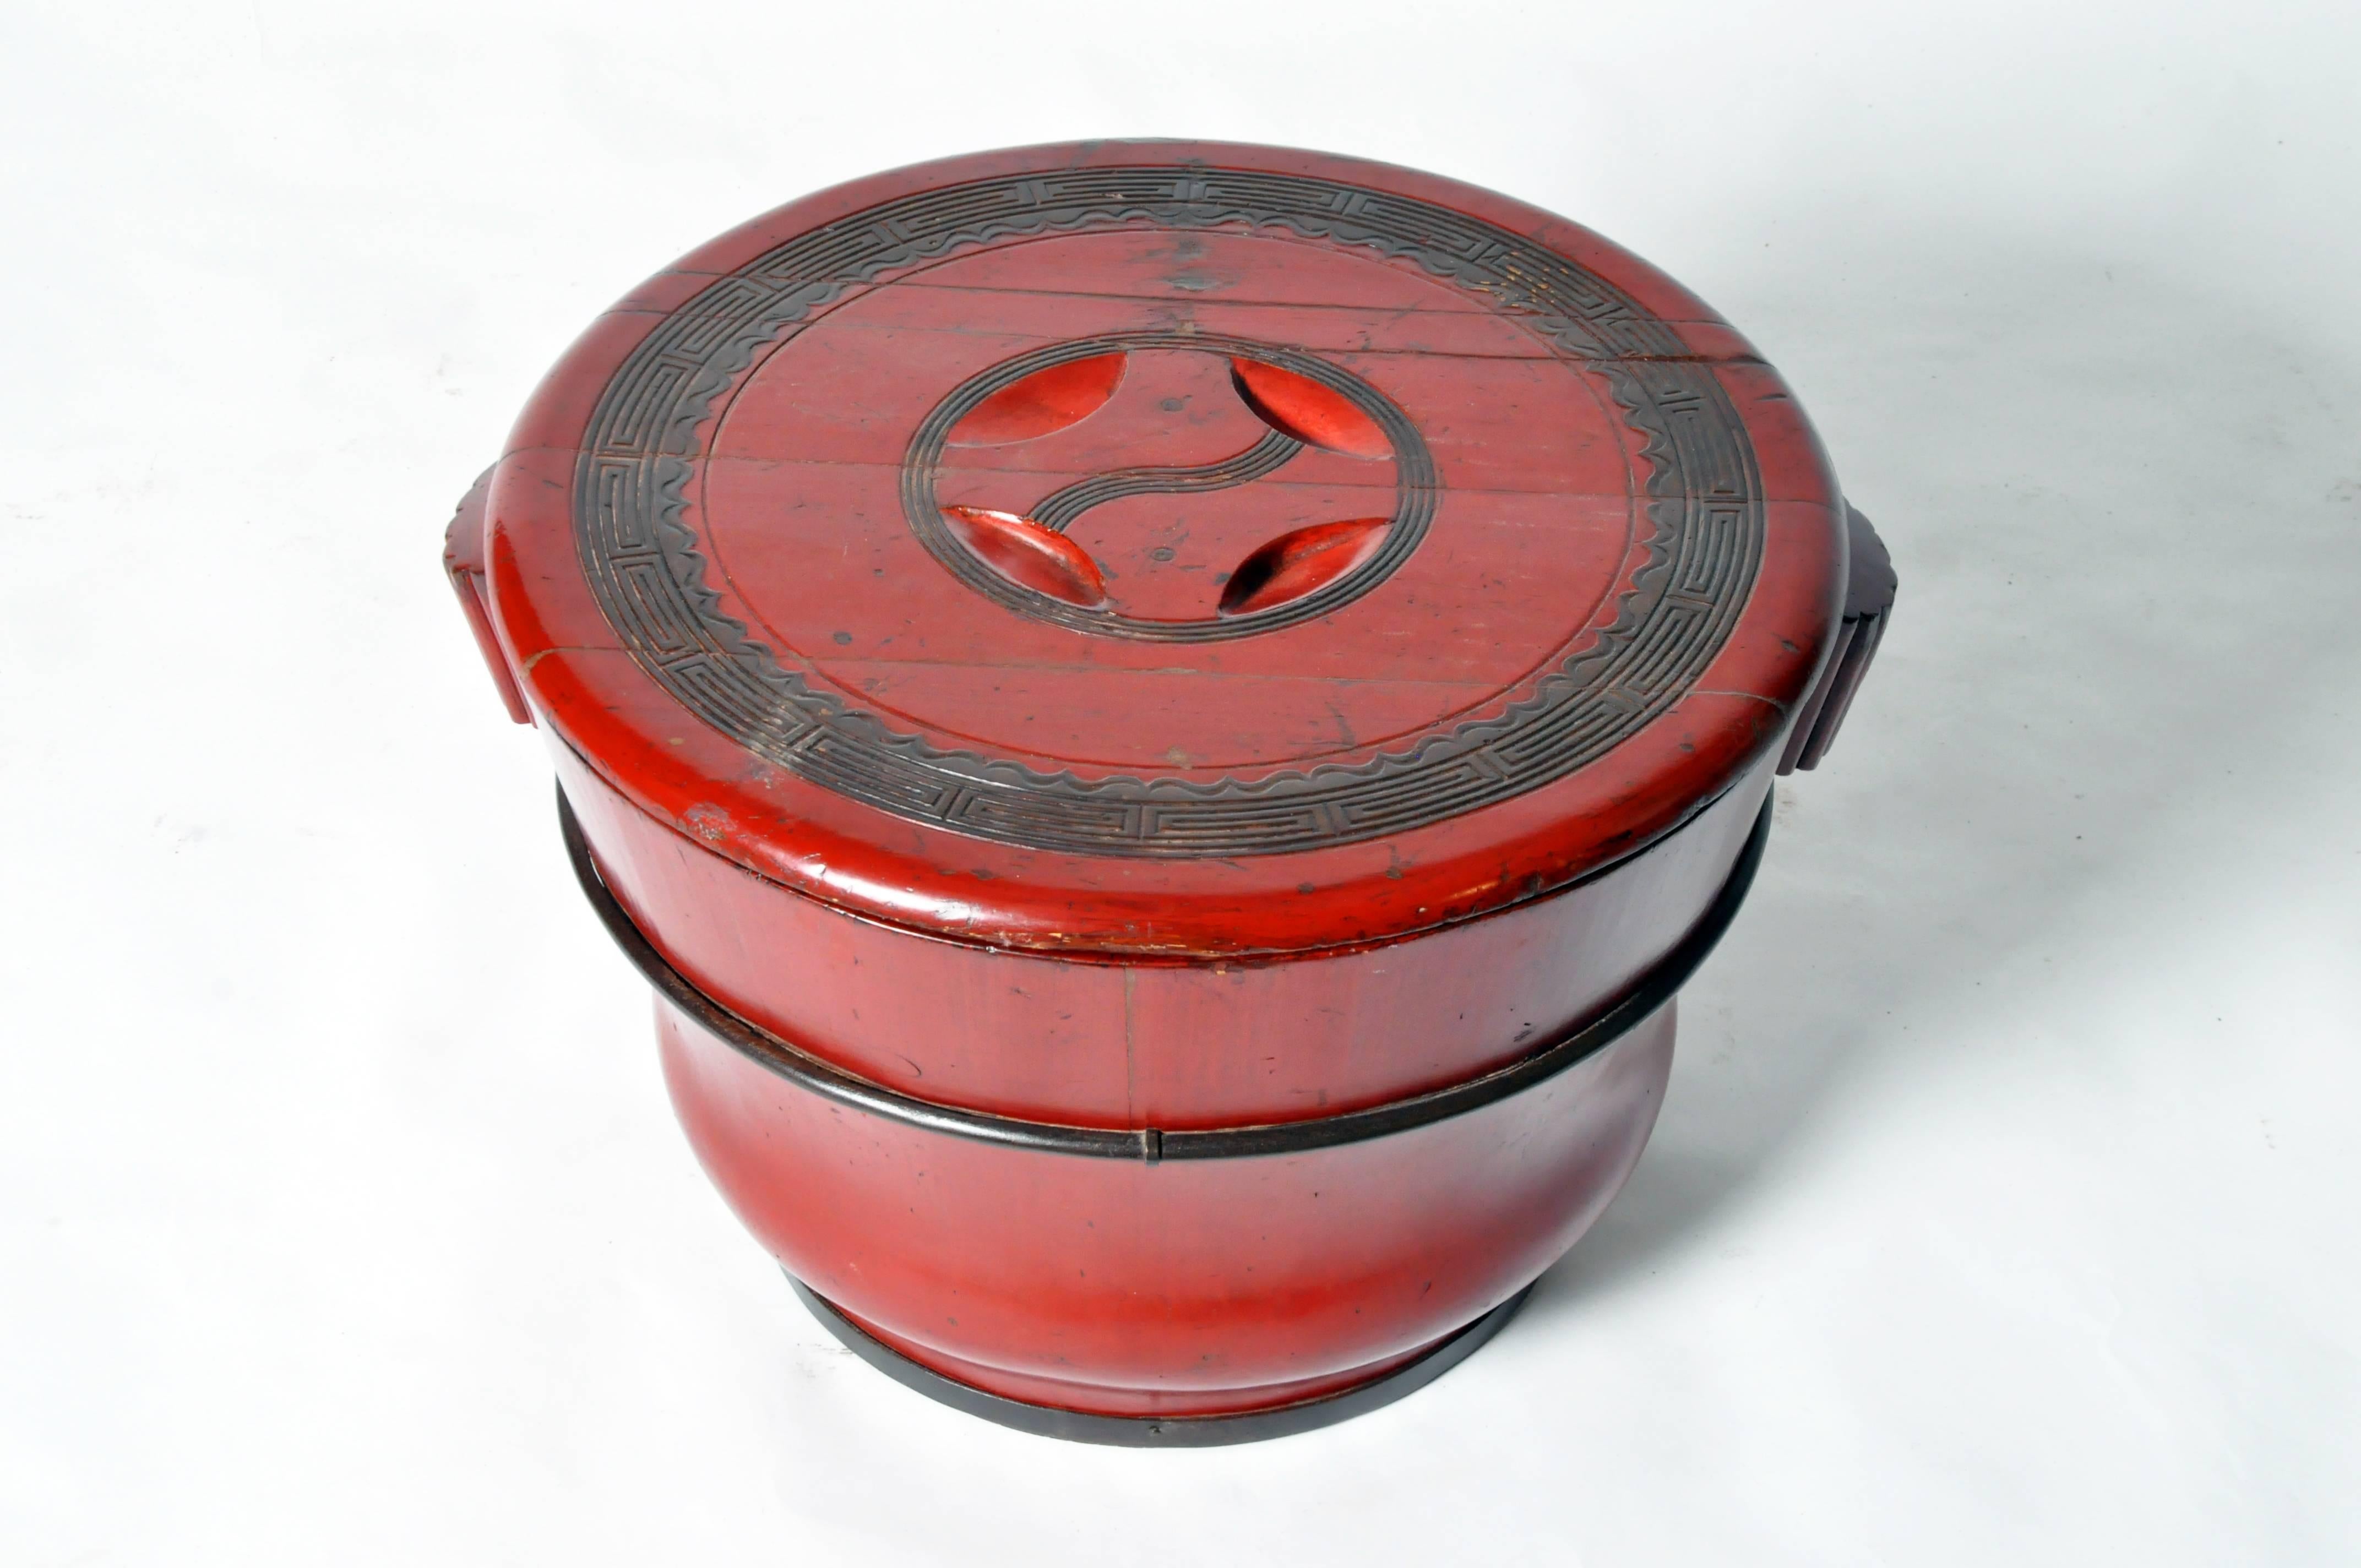 This Chinese rice container is from Jiangsu, China and made from softwood. It was used to store rice and has a lid.